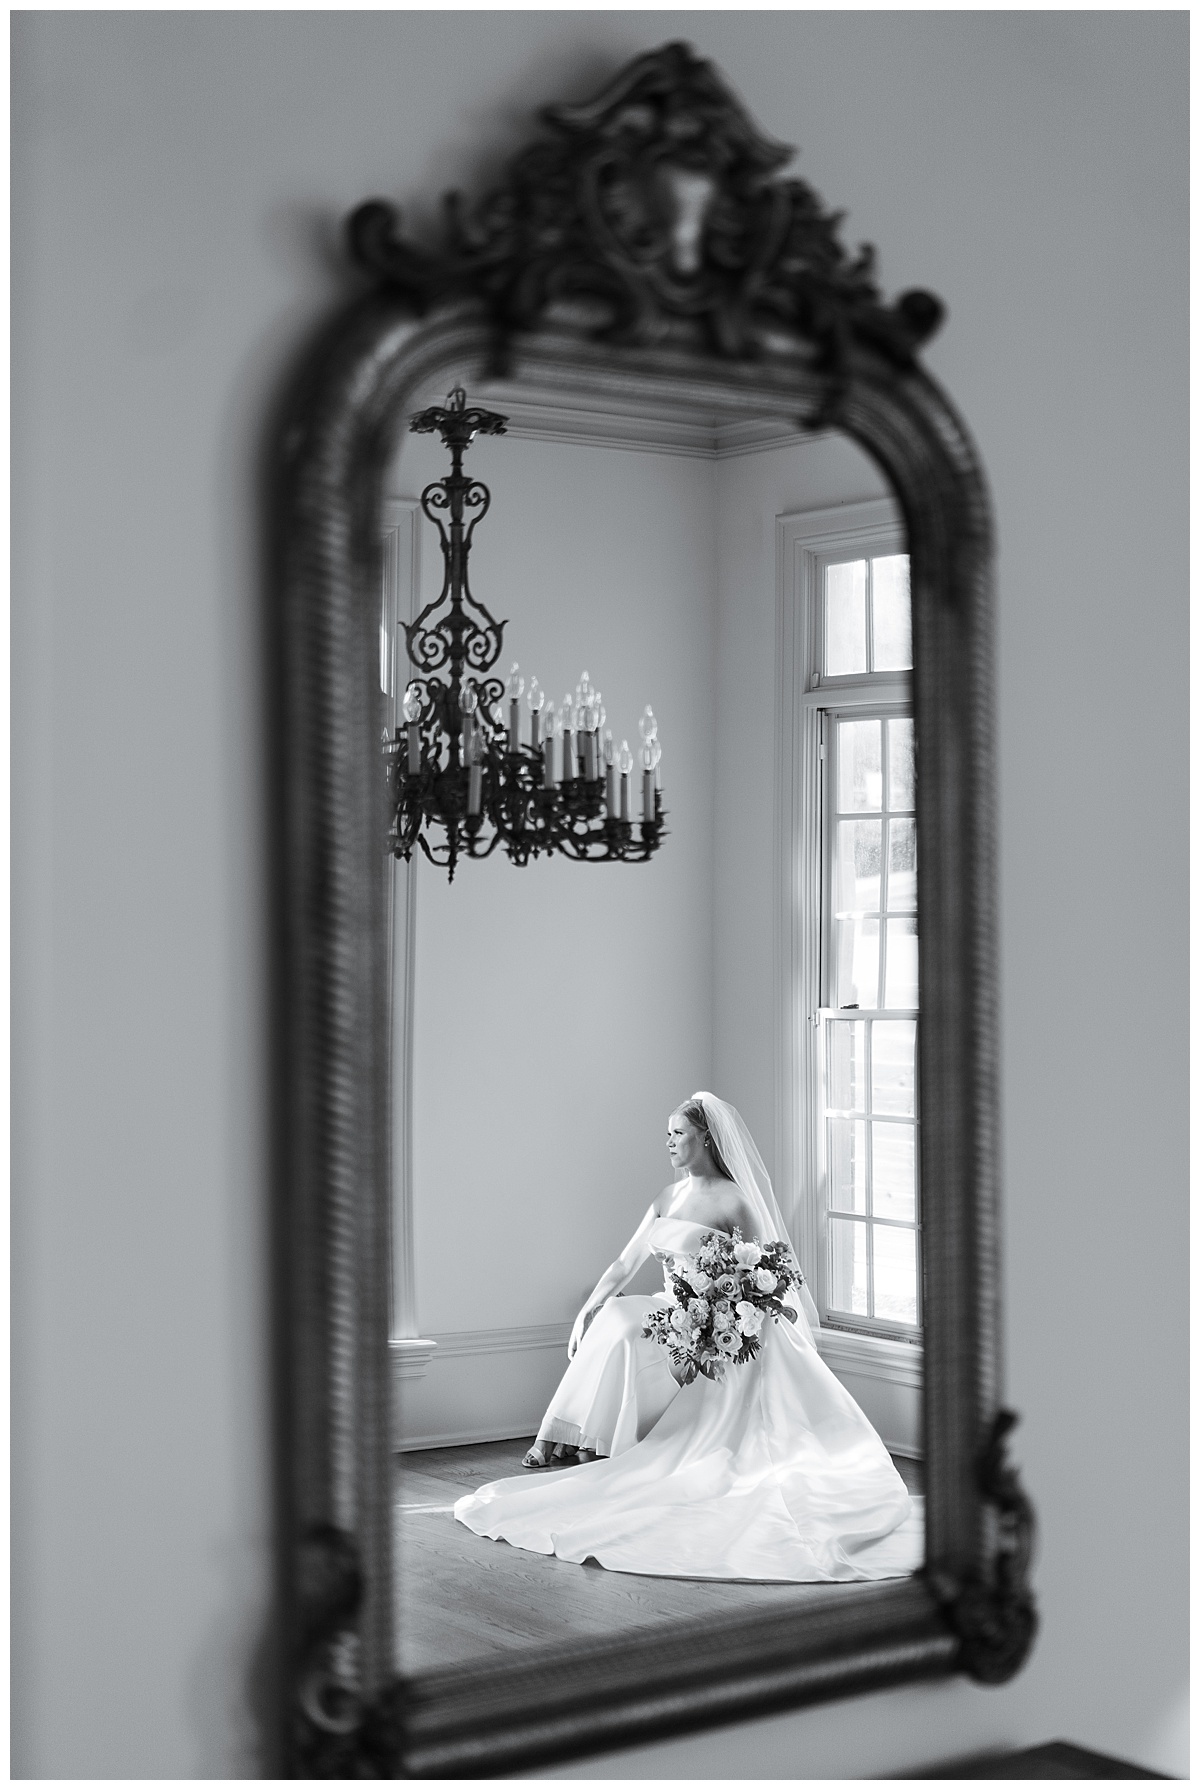 Antique mirror captures the reflection of bride smiling for Swish & Click Photography